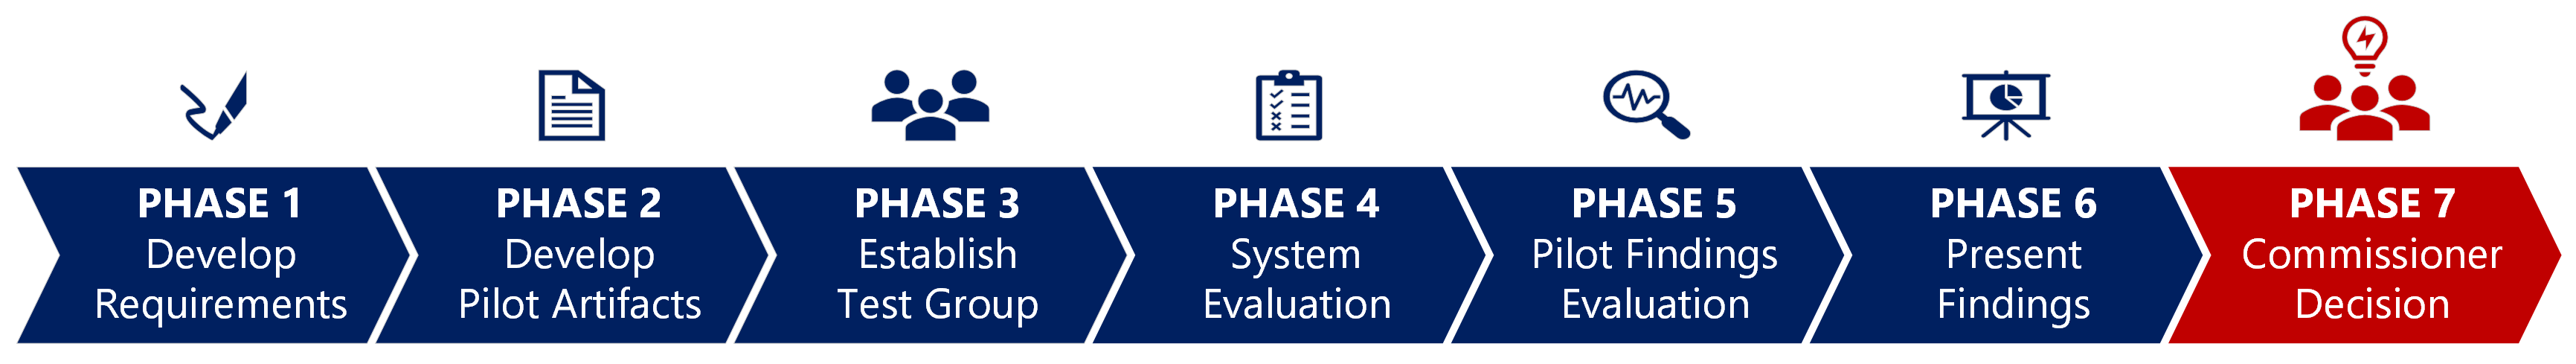 Phase 1 Develop Requirements, Phase 2 Develop Pilot Artifacts, Phase 3 Establish Test Group, Phase 4 System Evaluation, Phase 5 Pilot Findings Evaluation, Phase 6 Present Findings, Phase 7 Commissioner Decision 